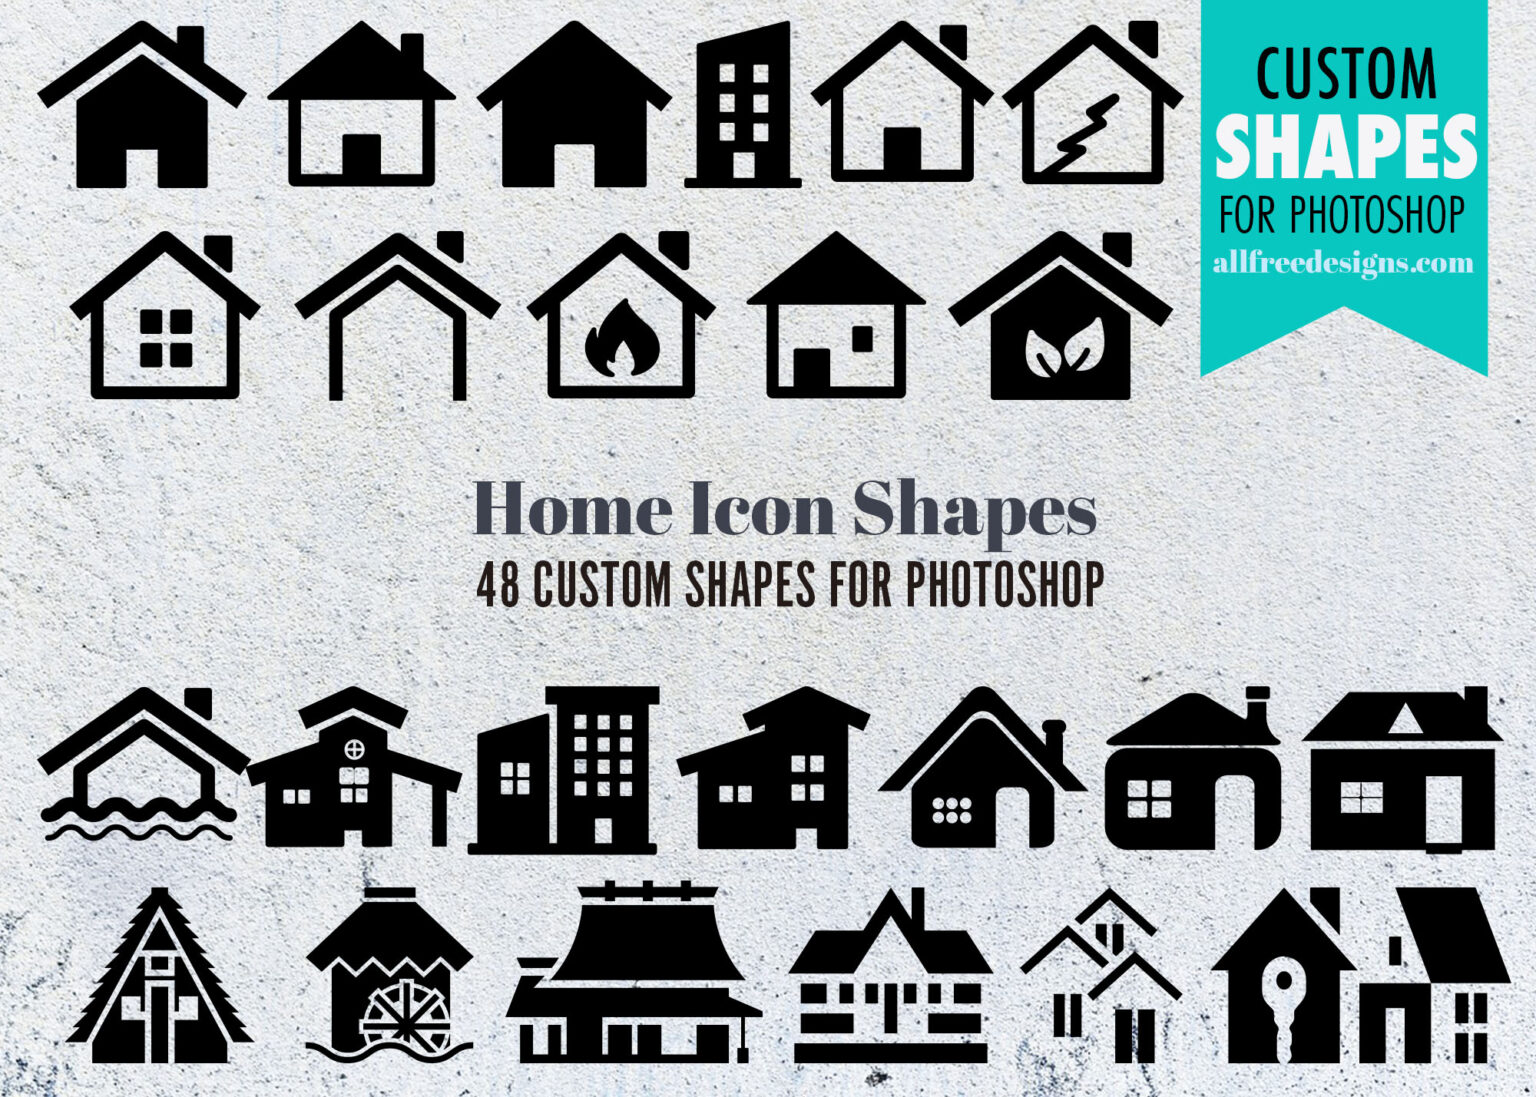 photoshop icon shapes free download